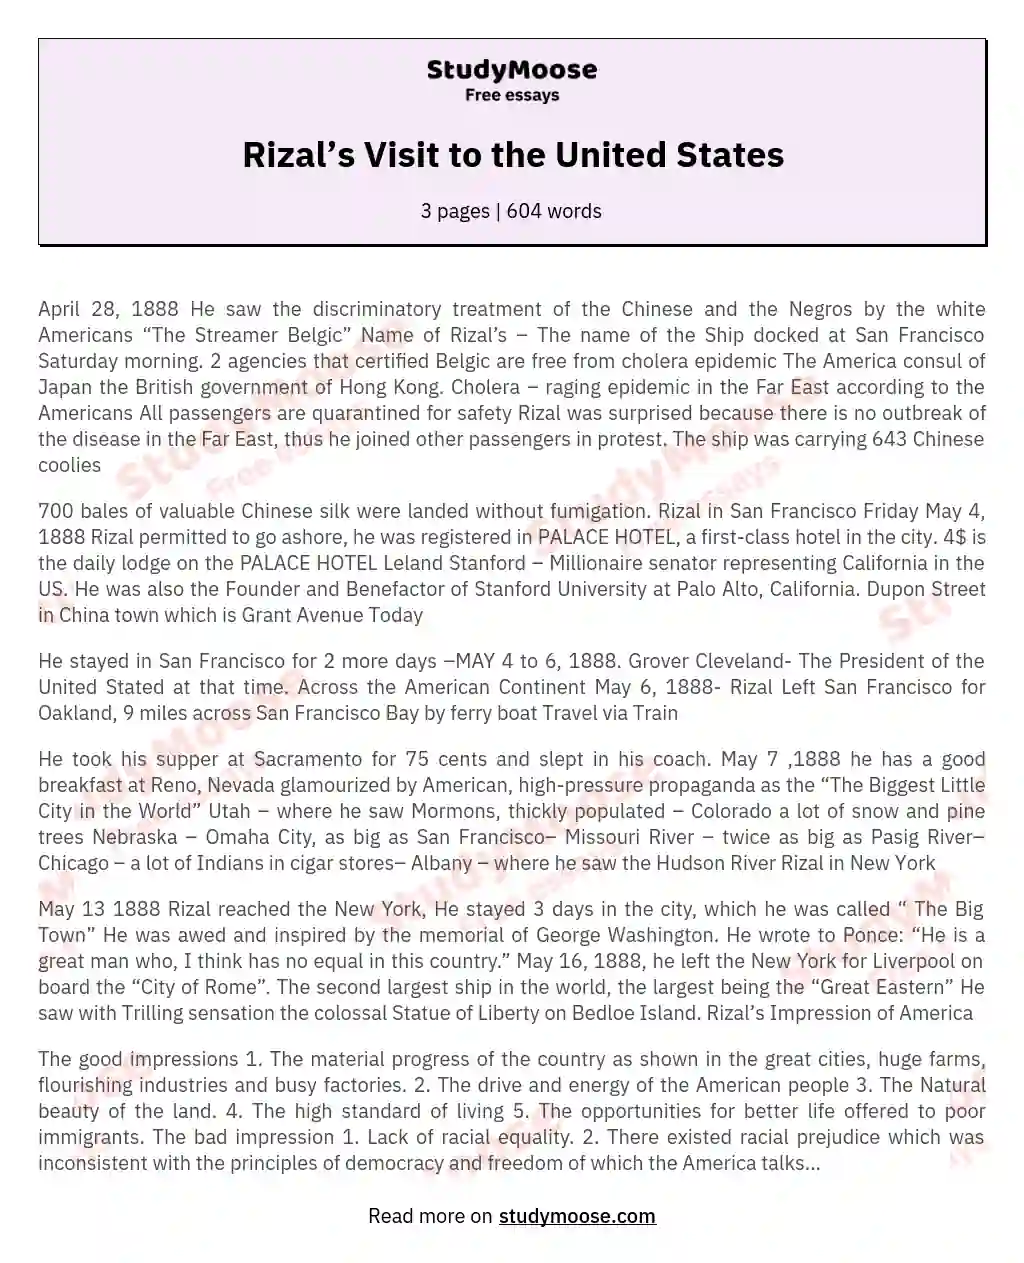 Rizal’s Visit to the United States essay